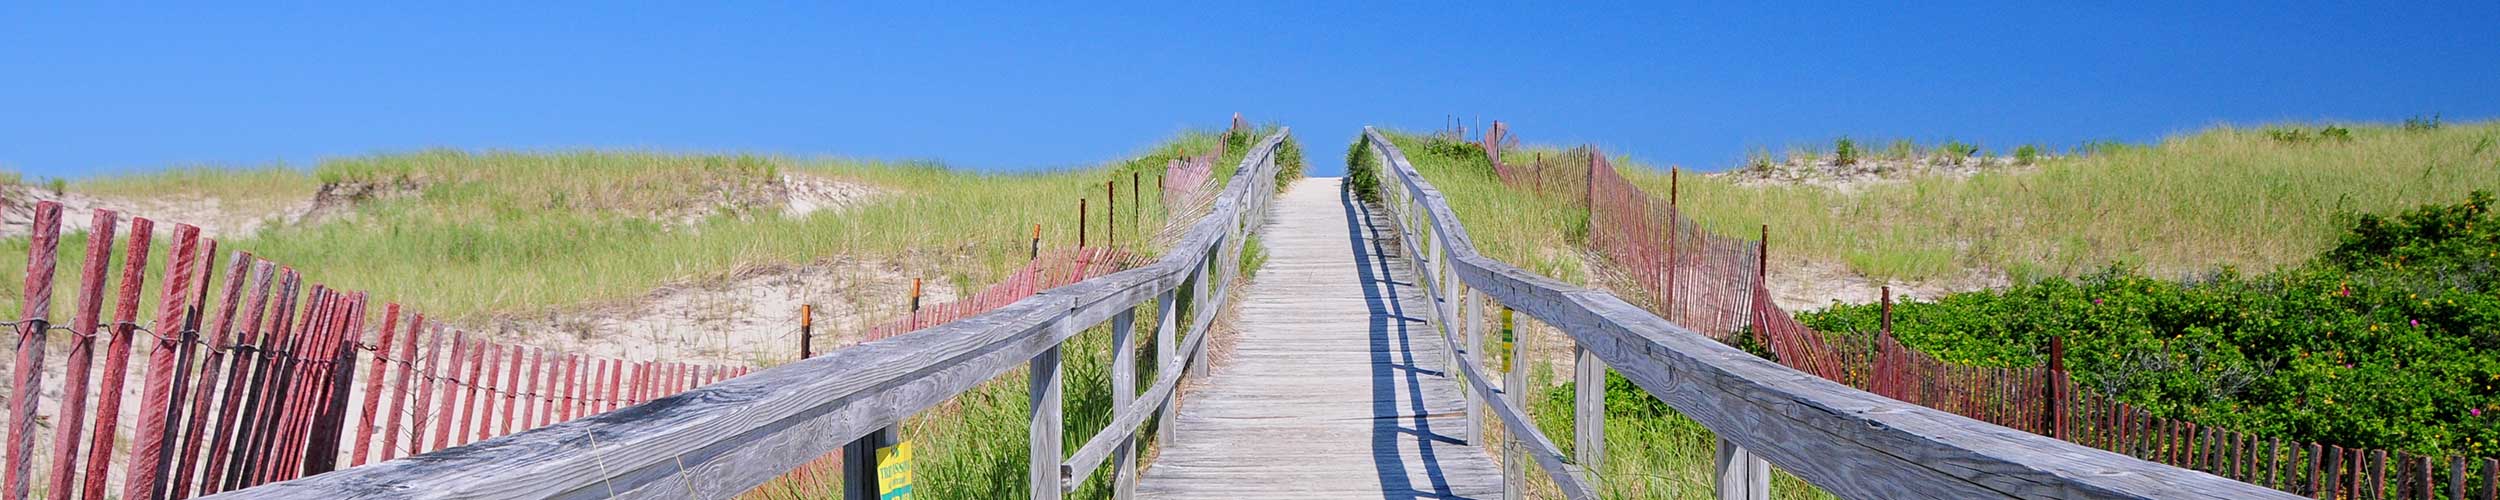 Rental Homes in York, Maine from Sunny Beach Rentals